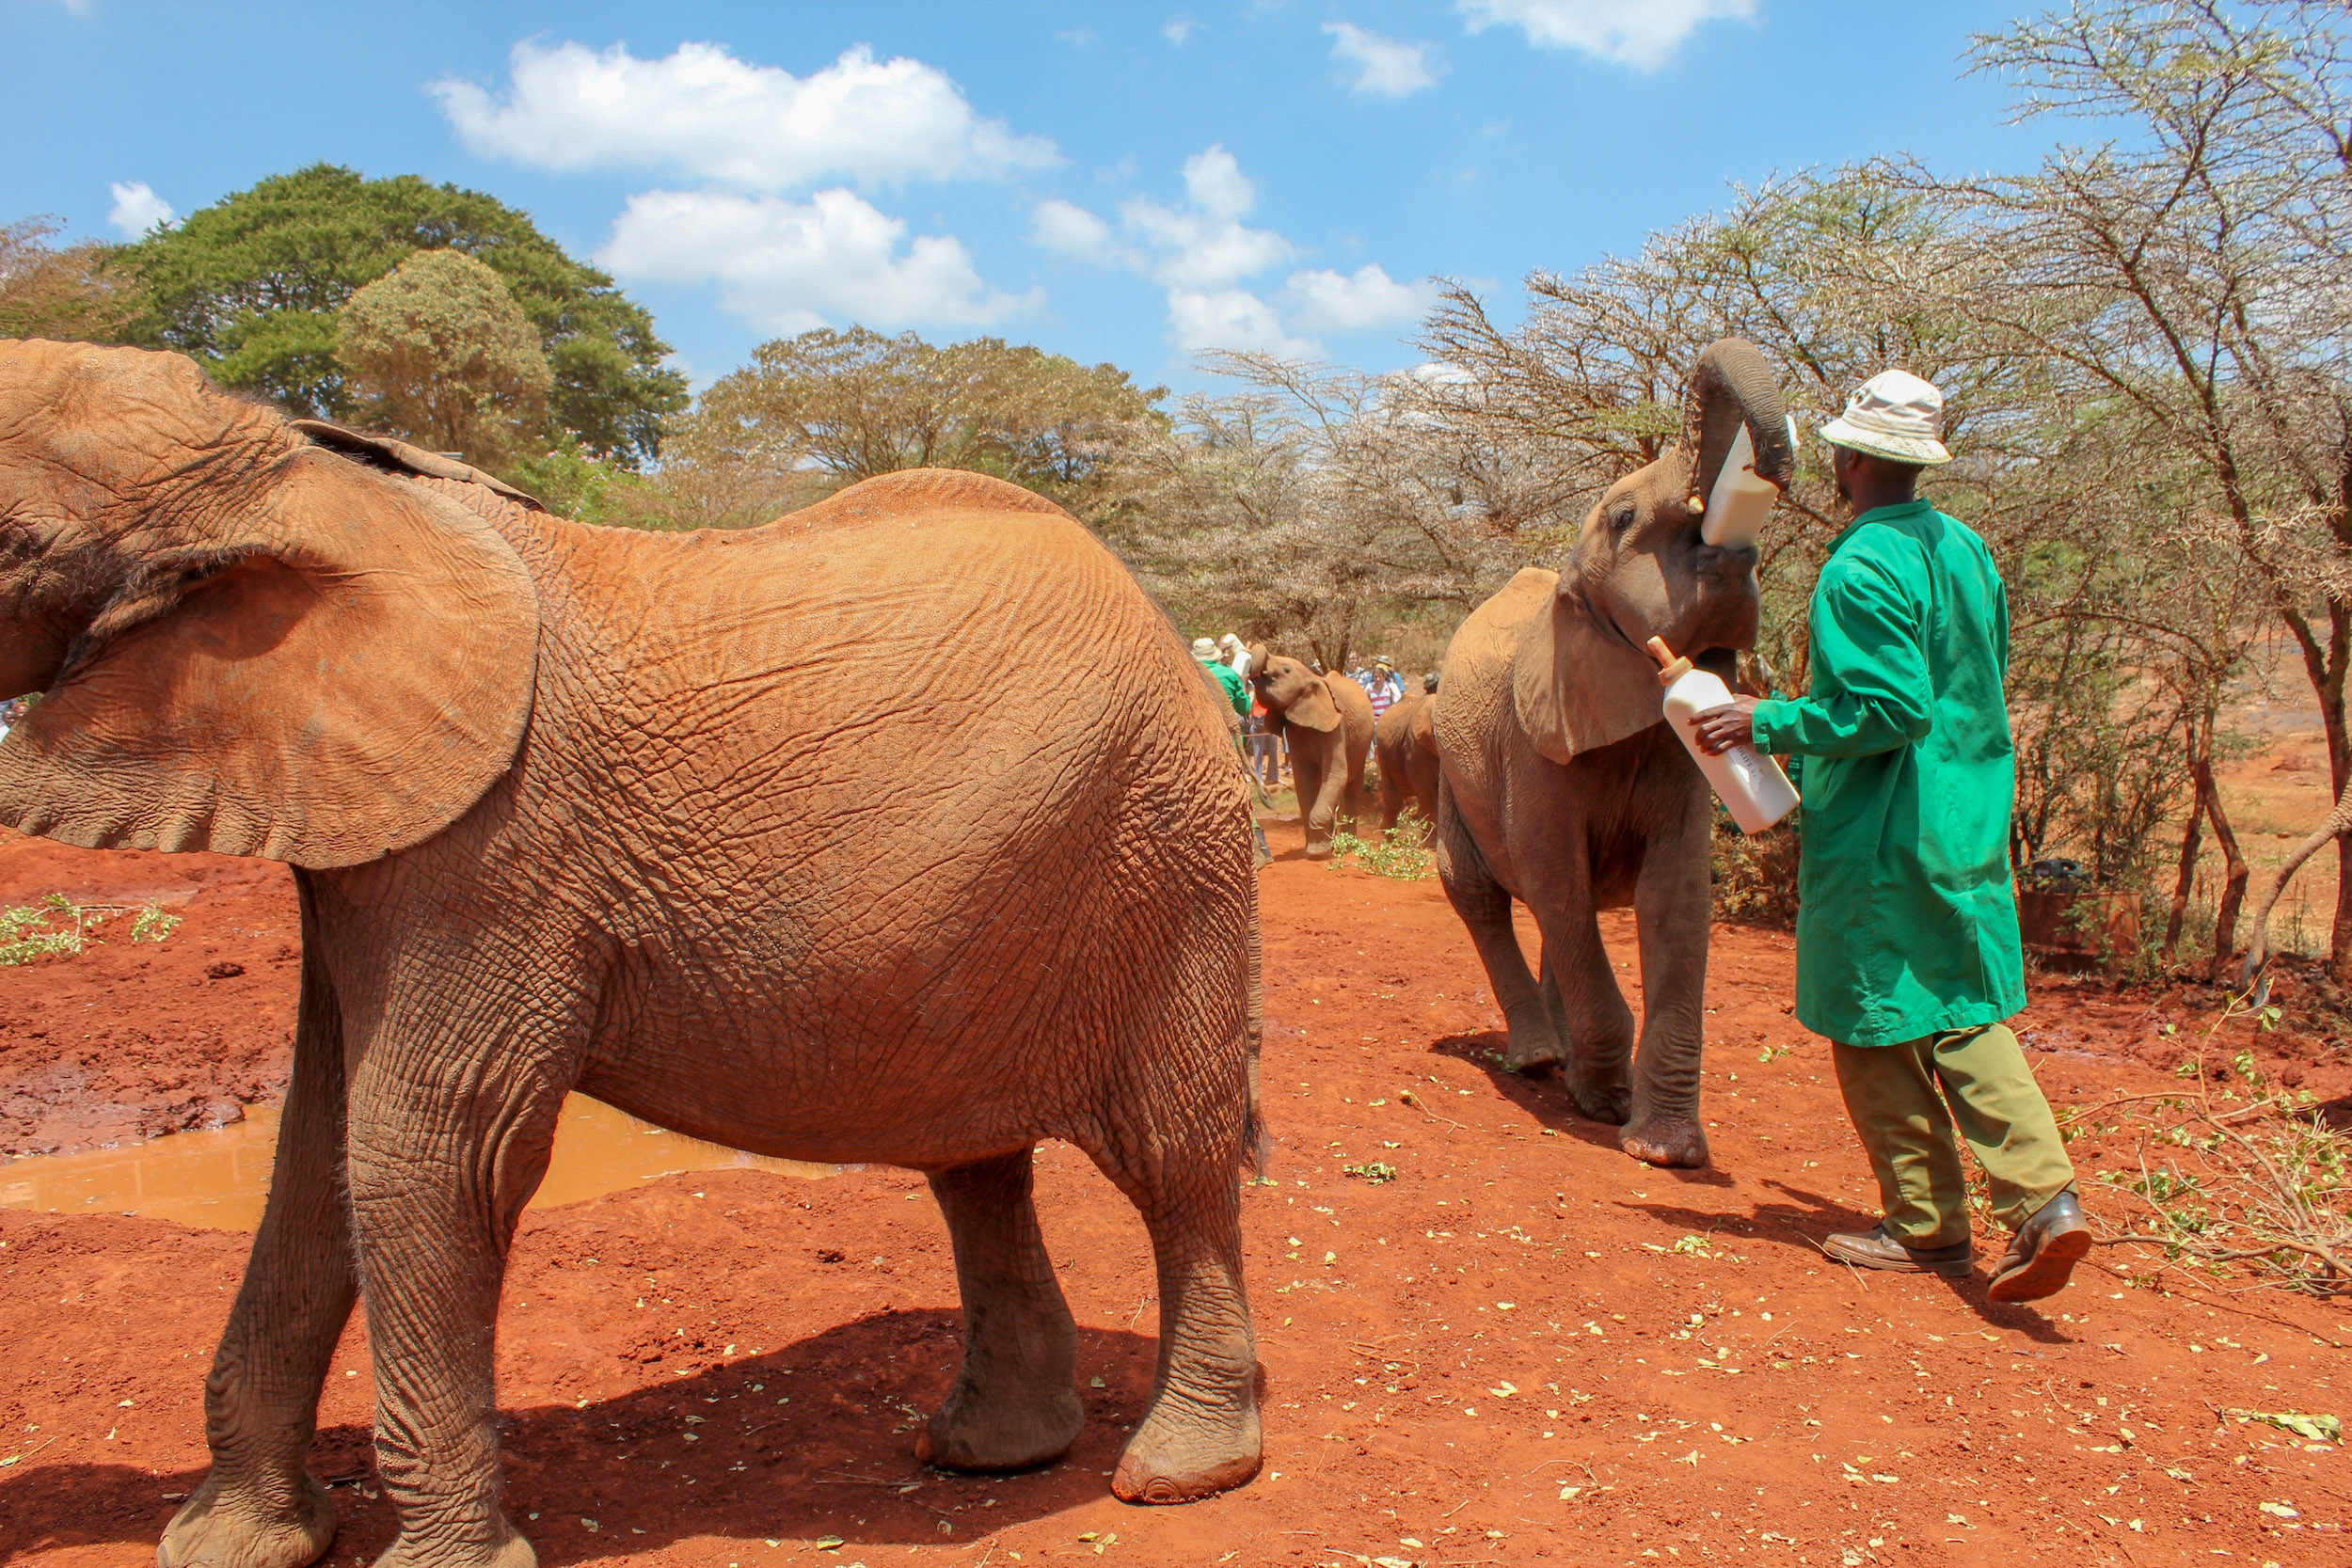 Two small elephants are being fed milk out of large bottles. The men feeding the elephants are wearing green coats.